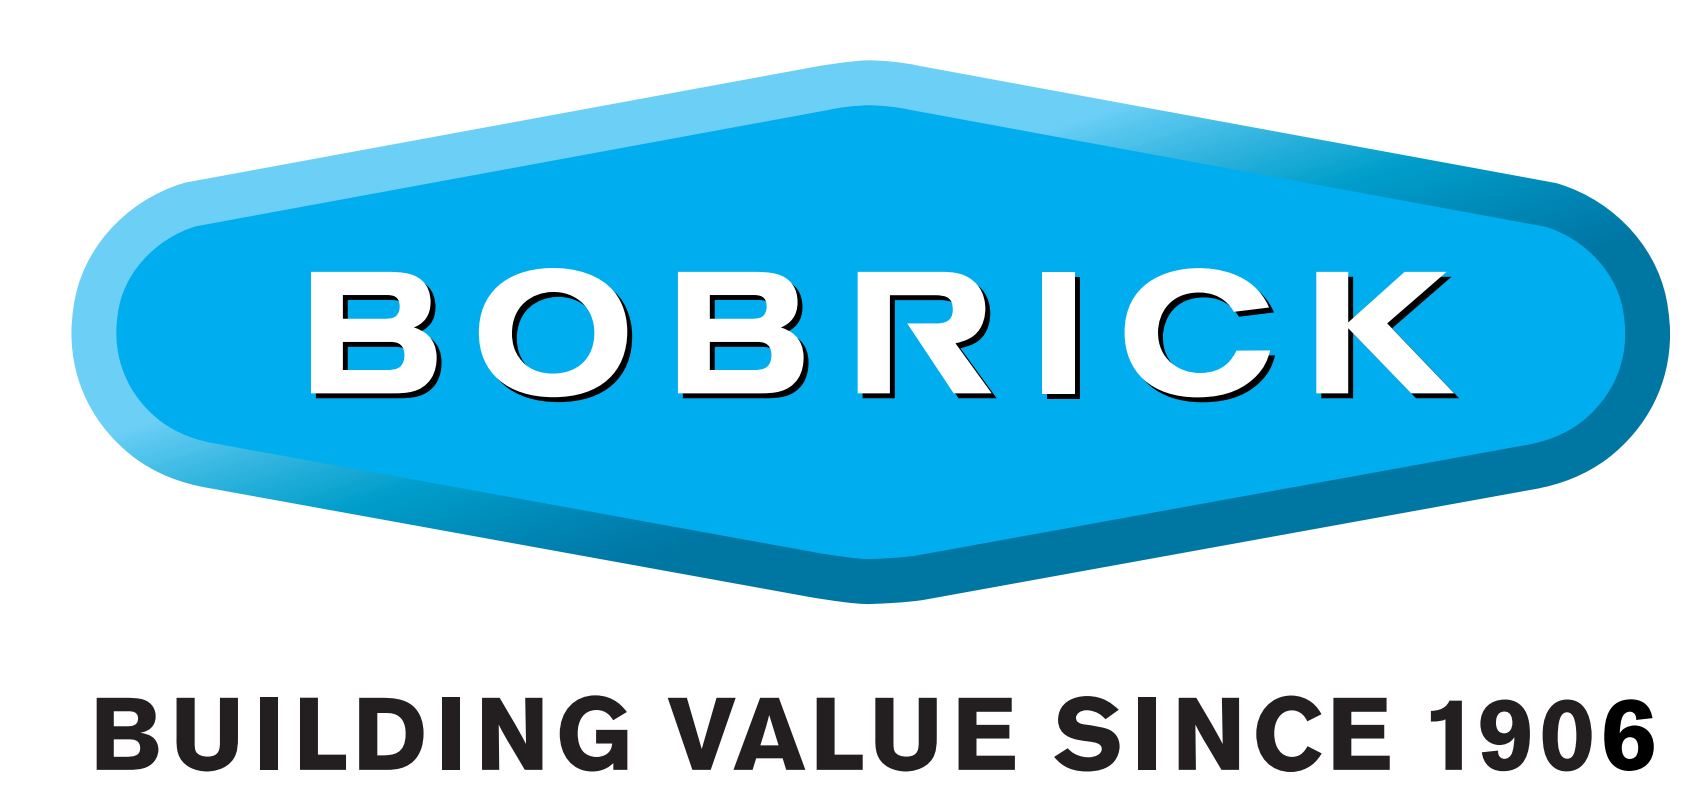 Bobrick is the provider of washroom accessories and toilet partitions